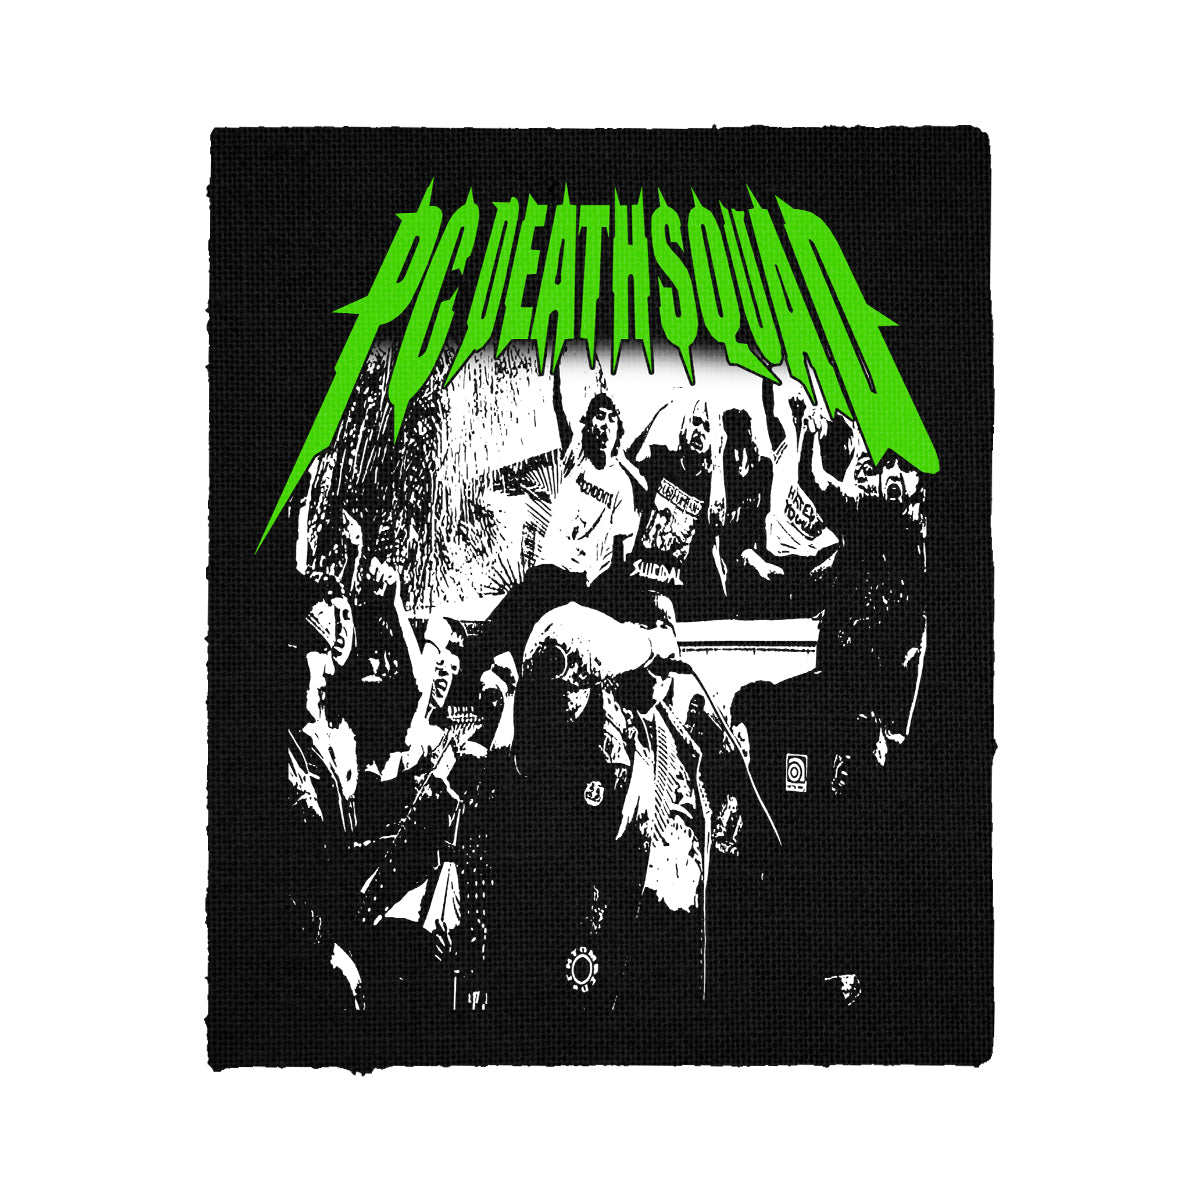 PC Deathsquad "It's a Rager" Back Patch